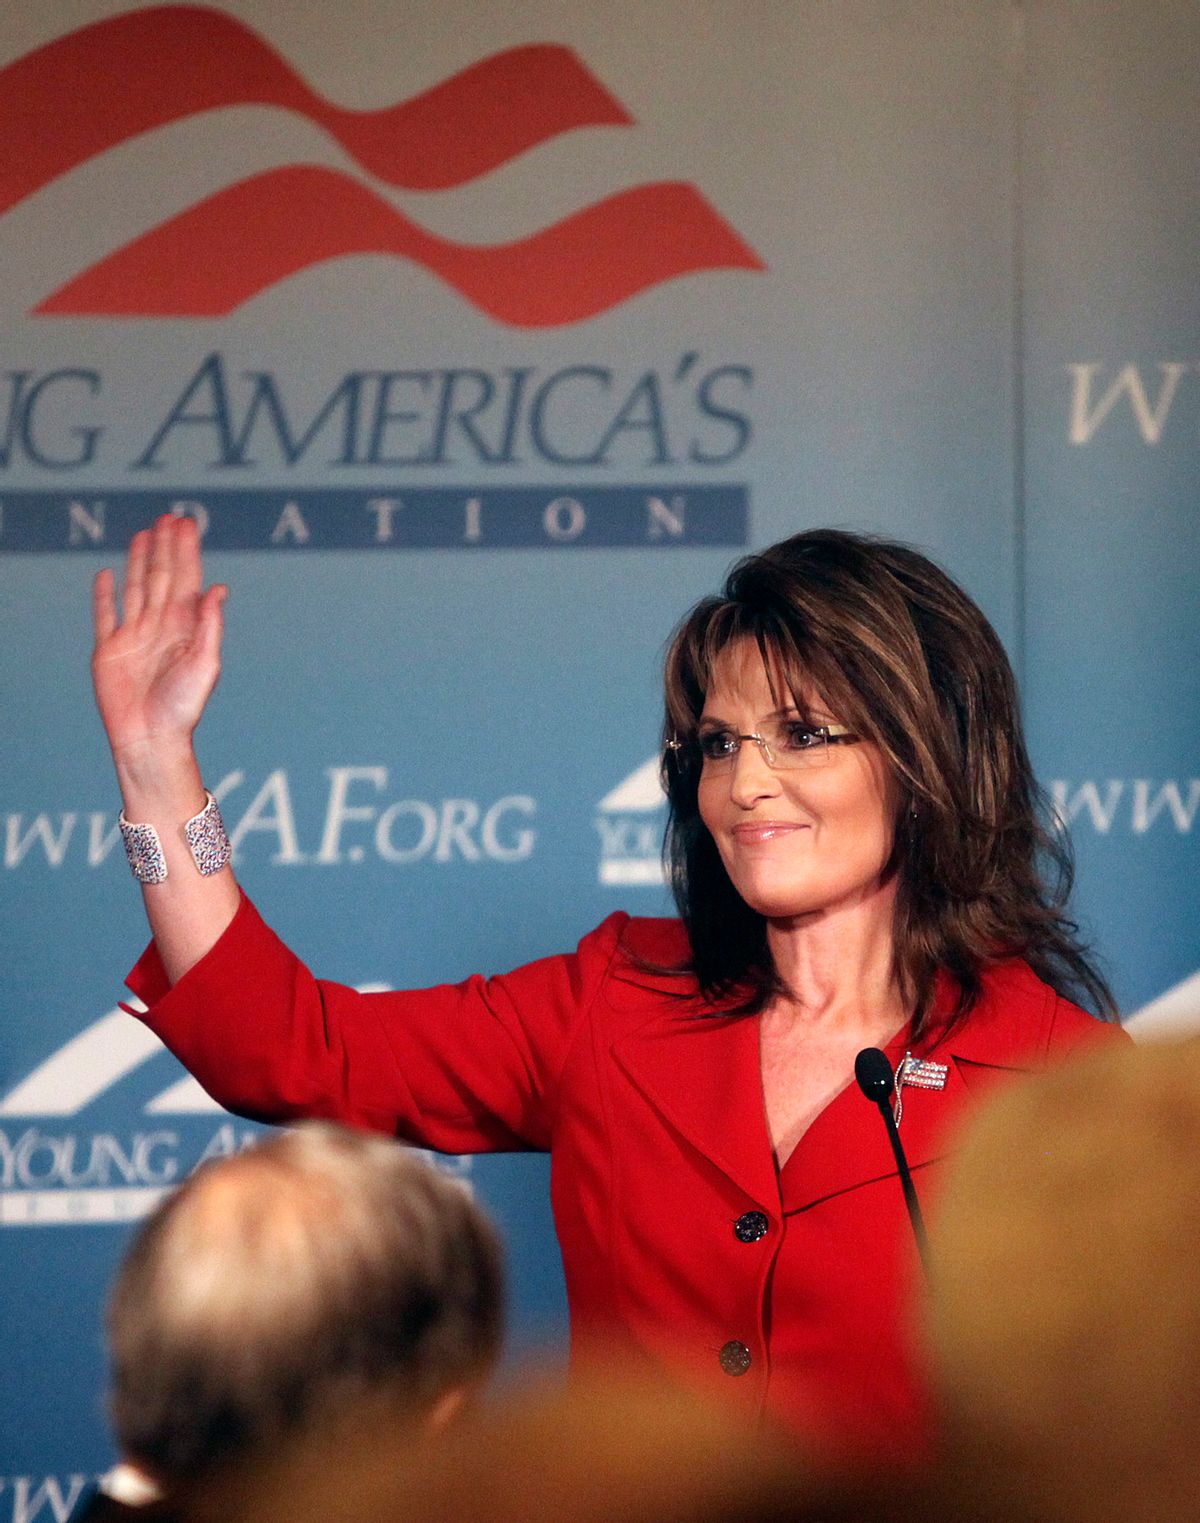 Former Republican vice Presidential candidate and Alaskan Governor Sarah Palin receives a standing ovation as she arrives at the Reagan Ranch Center in Santa Barbara, Friday Feb. 4, 2011. Palin was the headline speaker for  the Ronald Reagan Centennial celebration opening reception hosted by the Young Americans Foundation.  (AP Photo/Spencer Weiner) (Spencer Weiner)